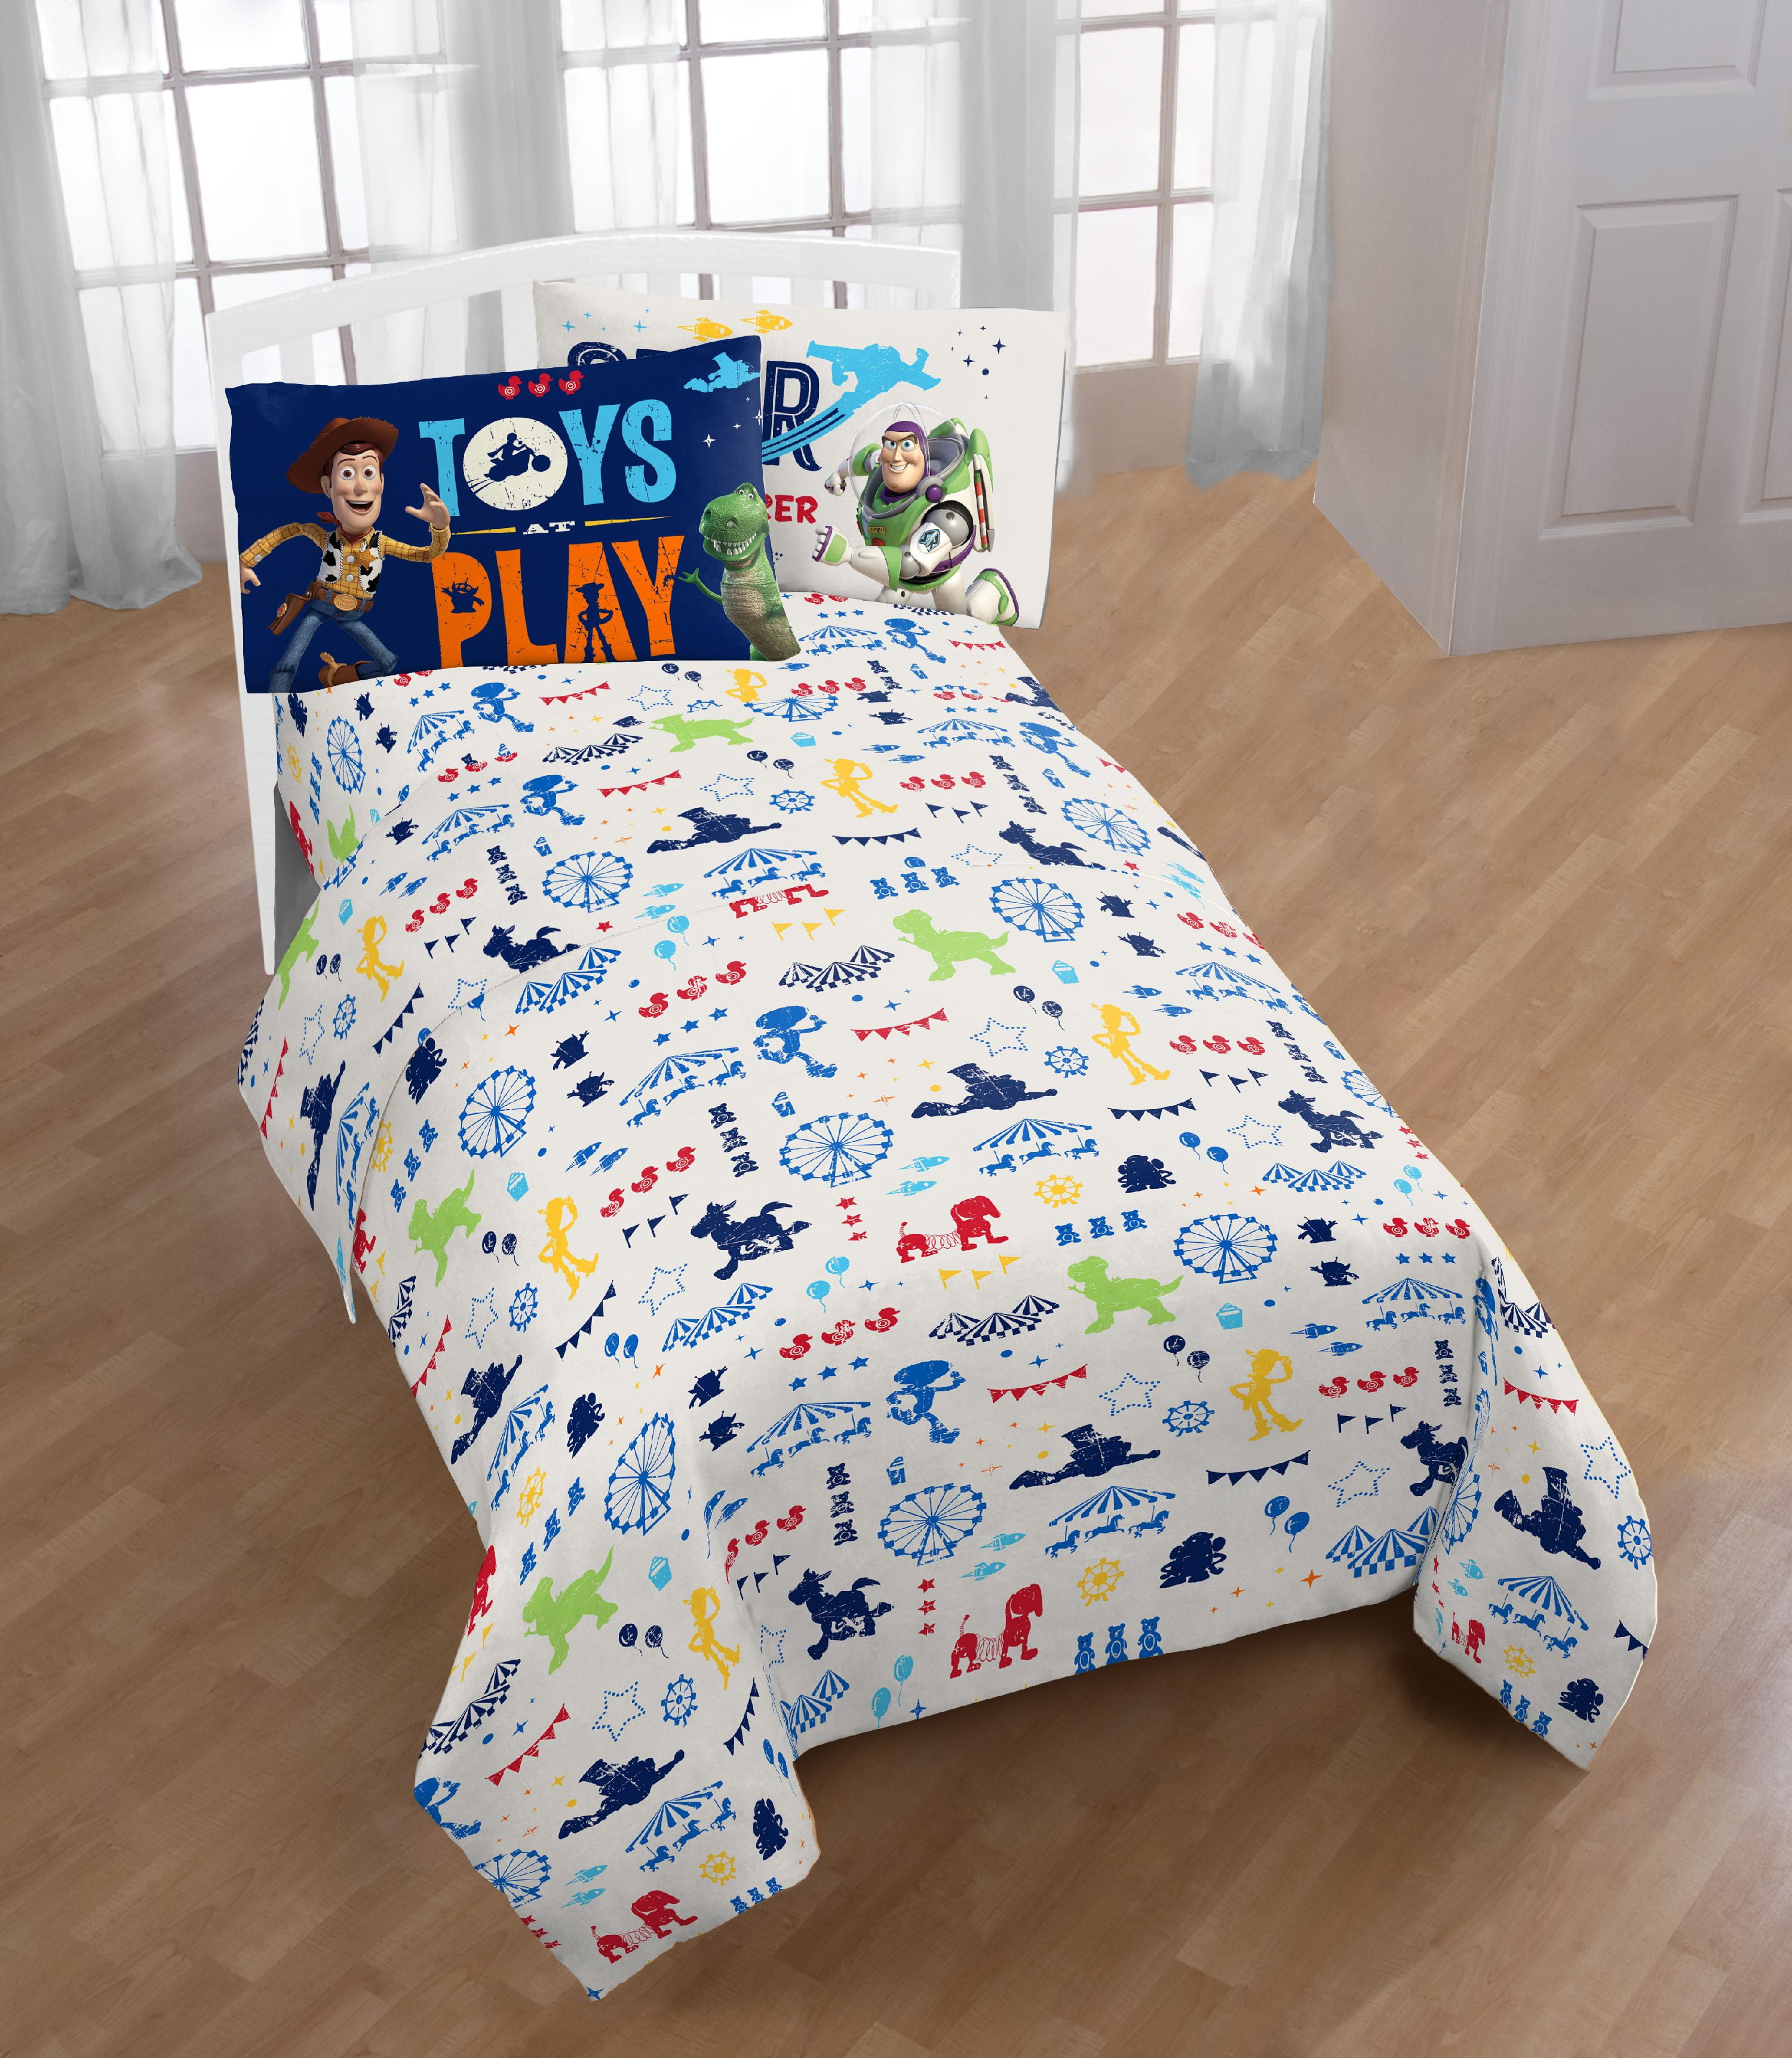 Toy Story 4 Single Duvet Cover SetReversible Kids Bedding Woody Buzz Forky!!